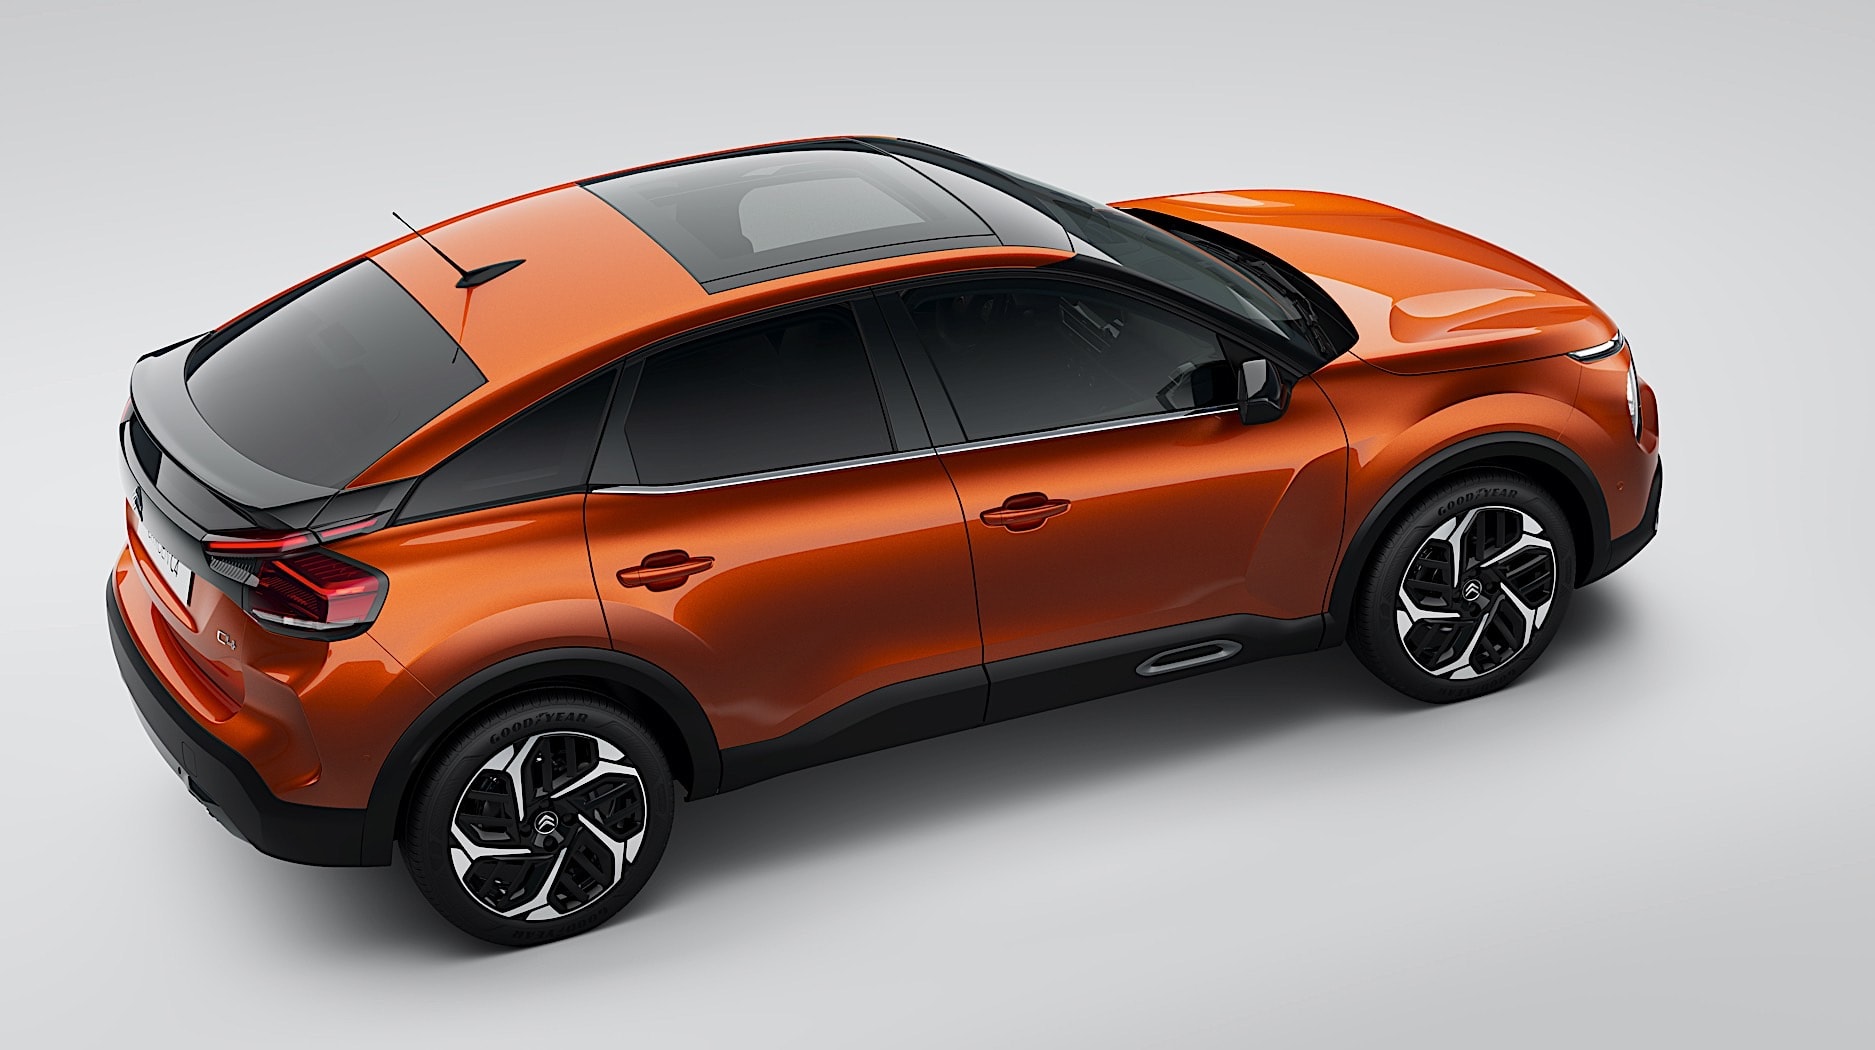 2021-citroen-c4-revealed-to-be-electric-as-well-144904_1.jpg